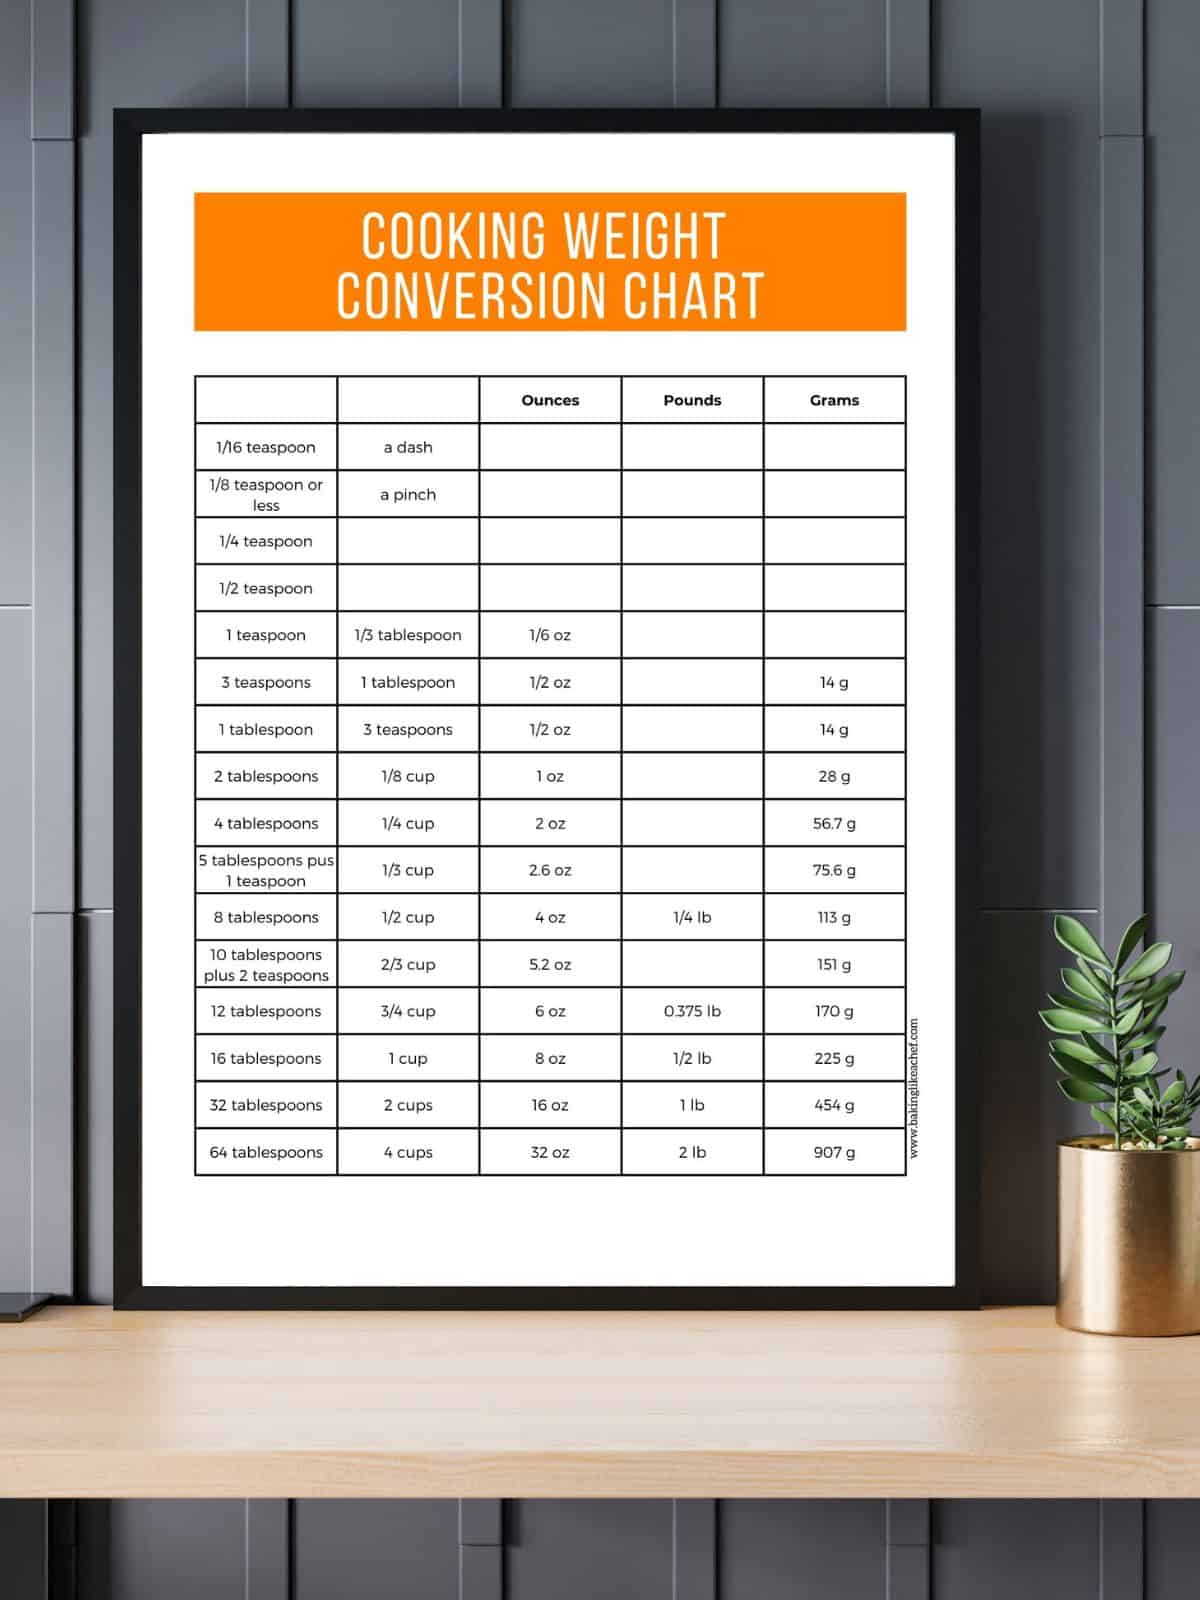 Cooking weight conversion chart mockup